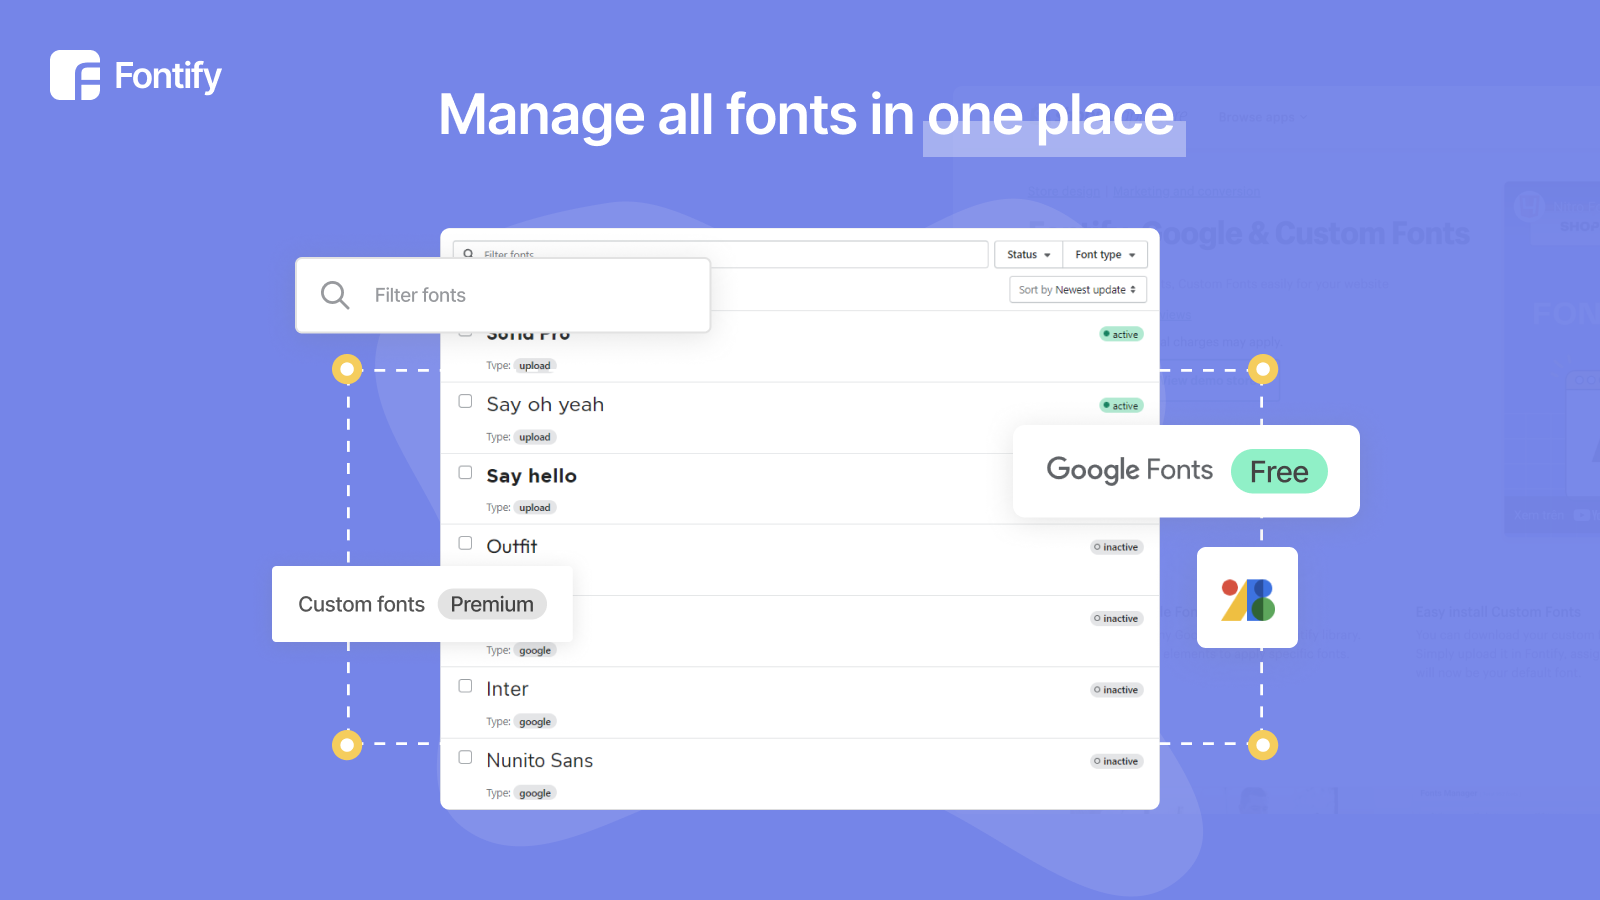 Manage all fonts in one place